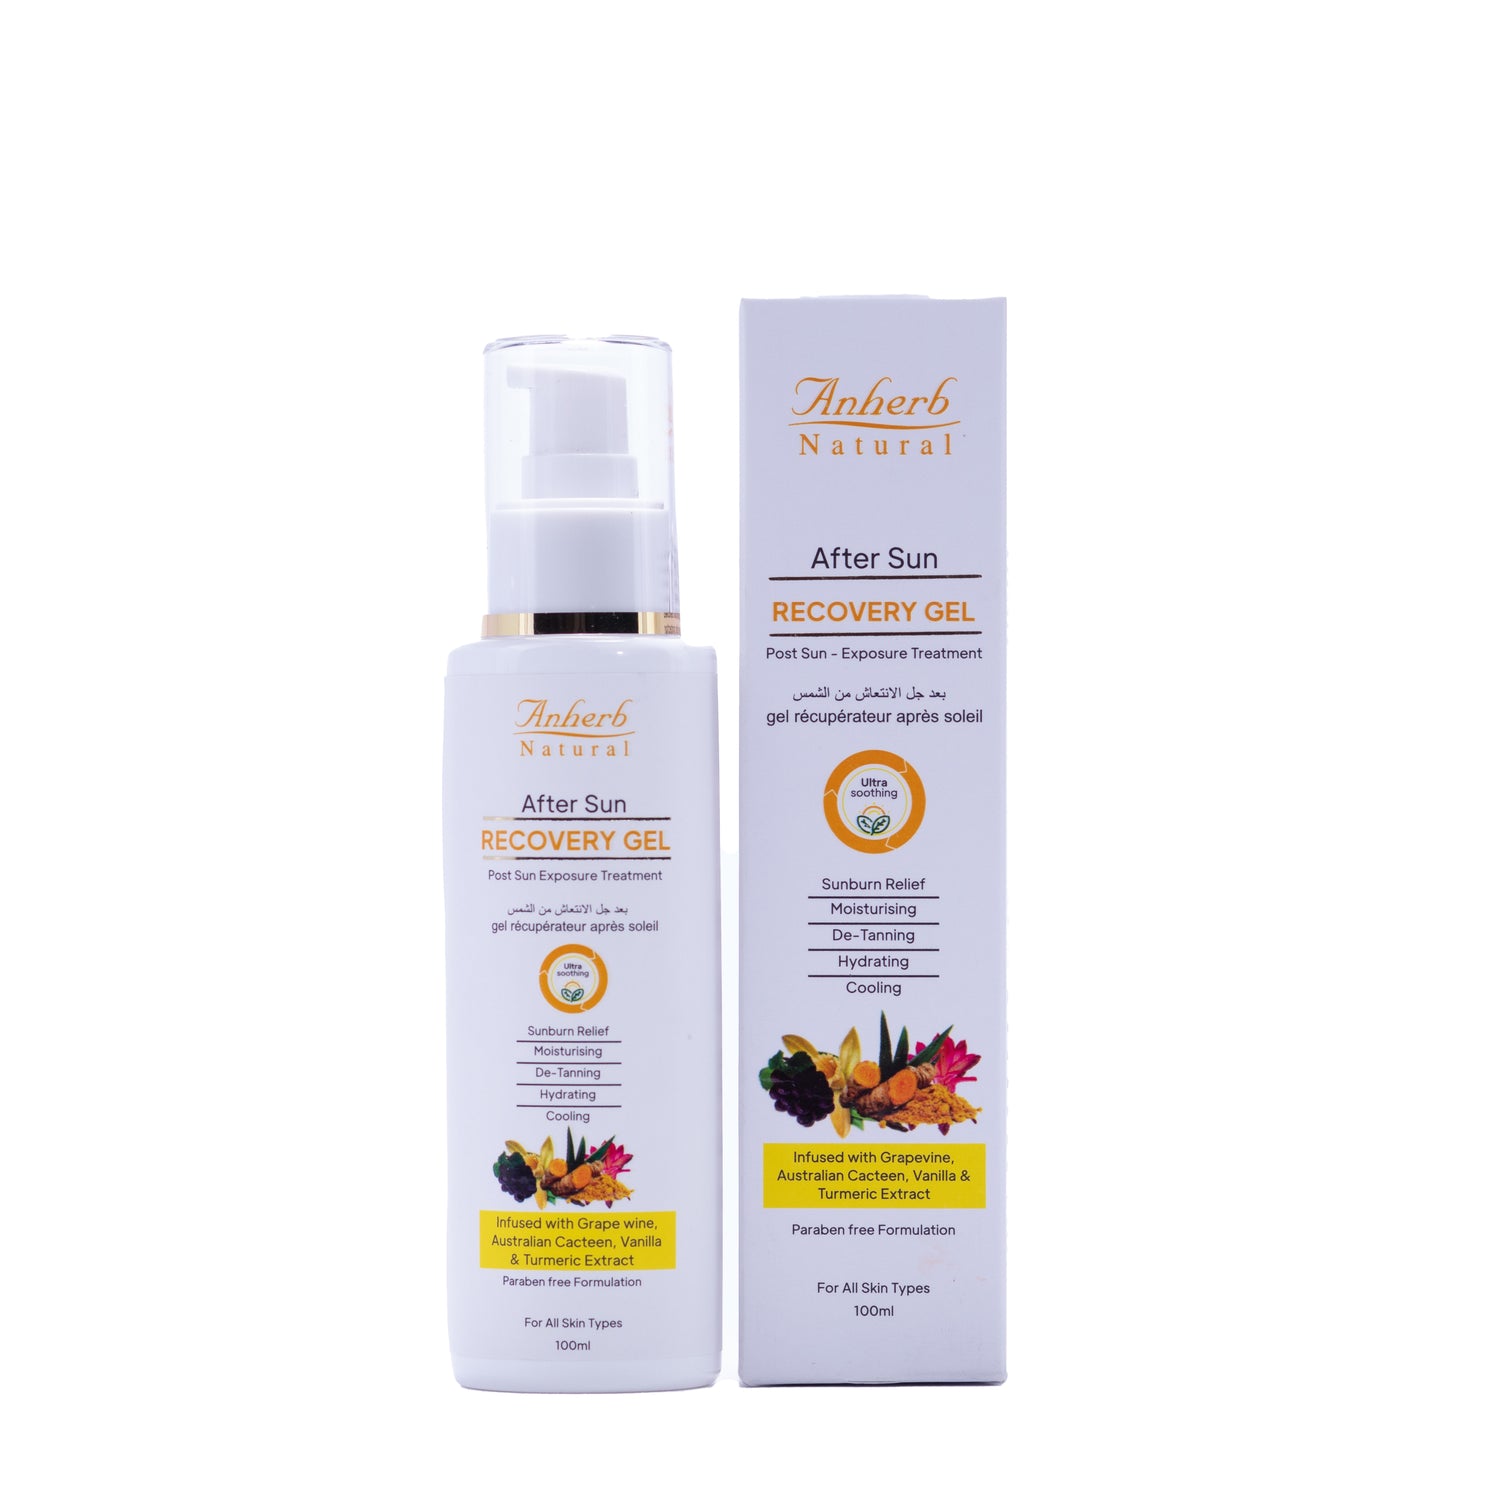 Anherb Natural After Sun Recovery Gel, UV - A &amp; UV - B Protection | Paraben Free Formulation| All Skin Types|100 ml